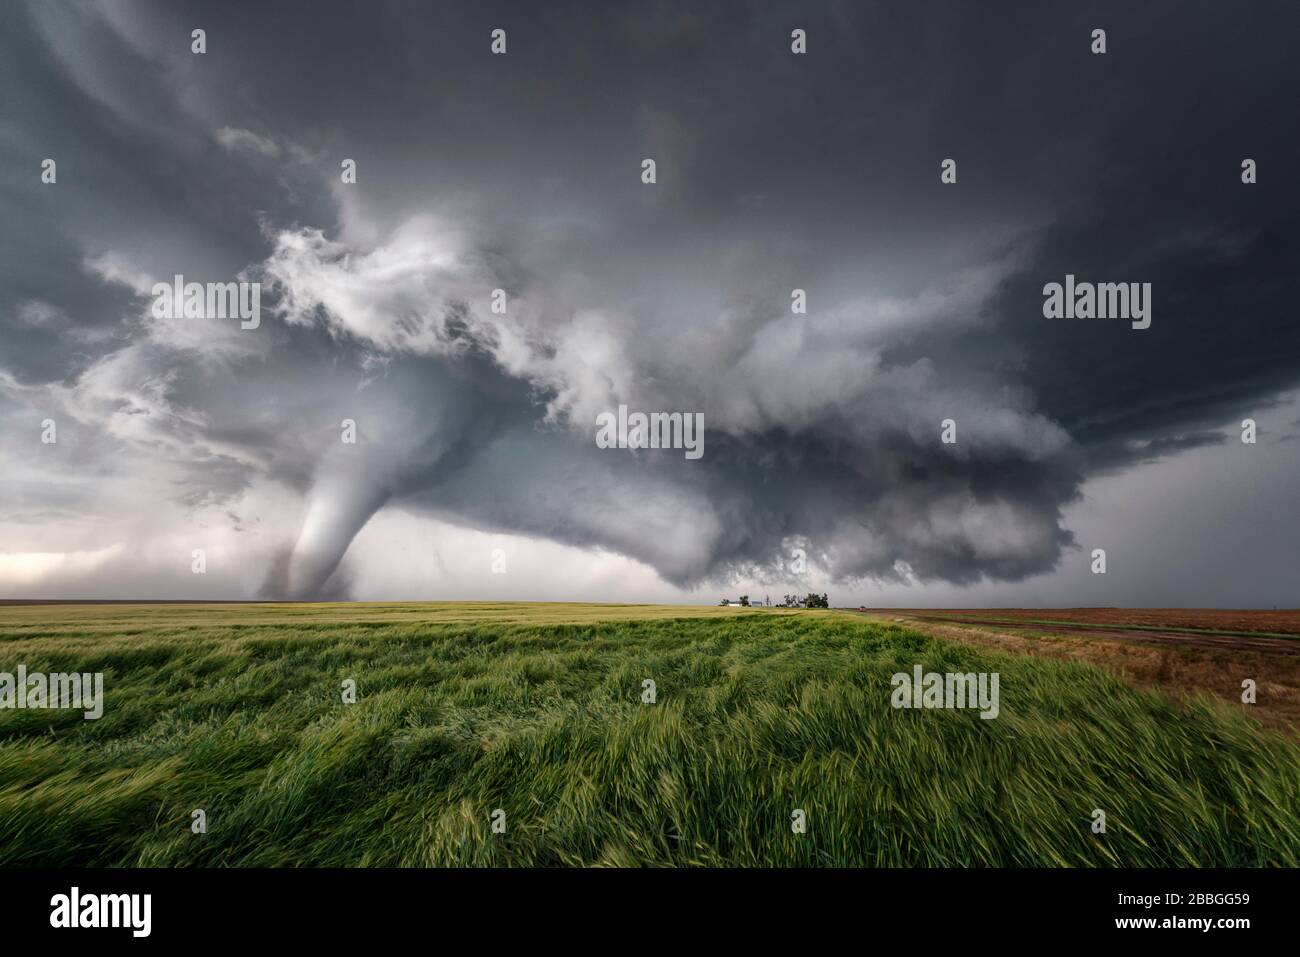 Tornado touching down over a field in Dodge City Kansas United States Stock Photo